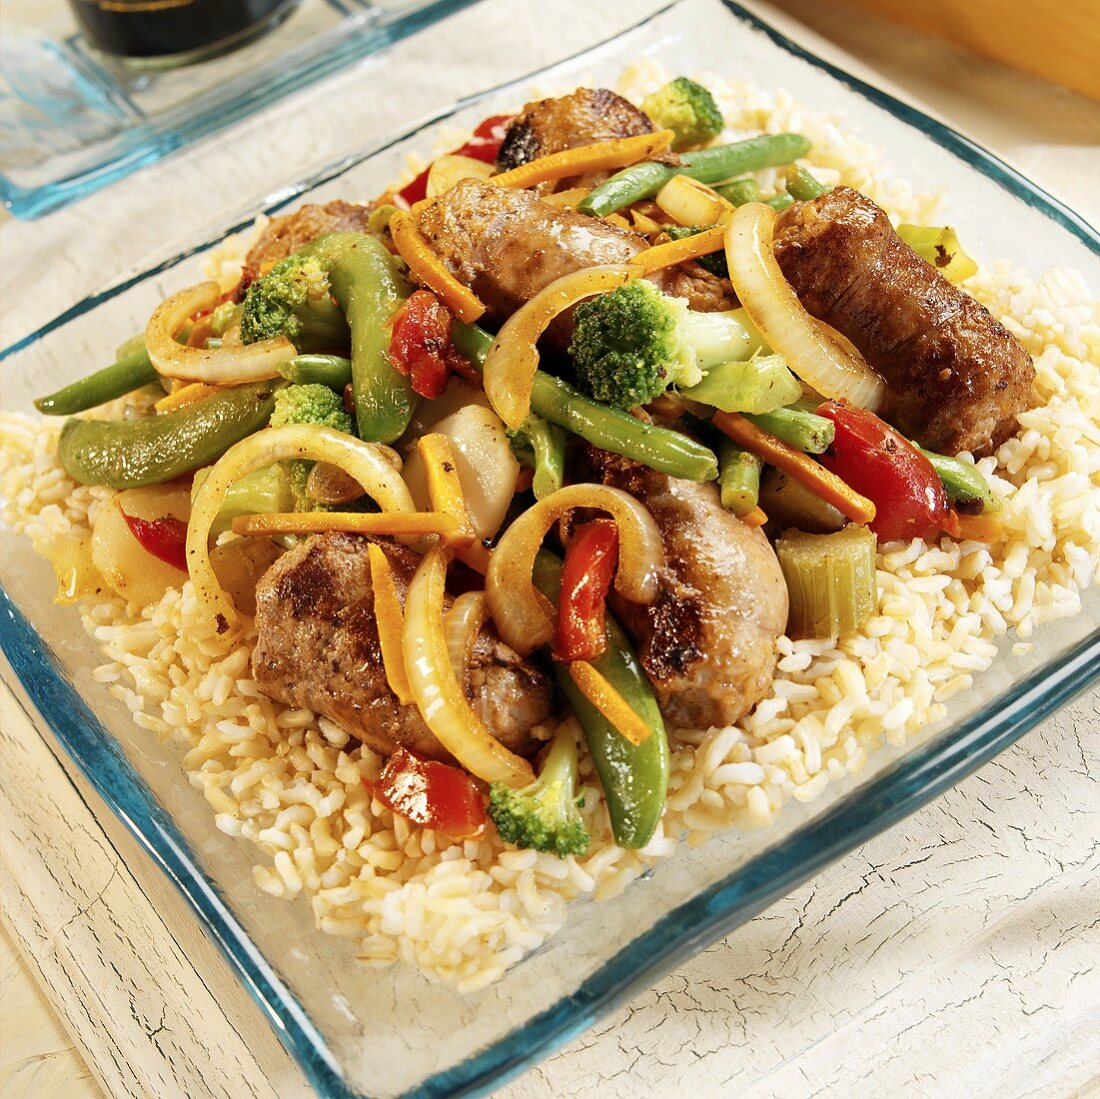 Turkey sausages with vegetables on rice